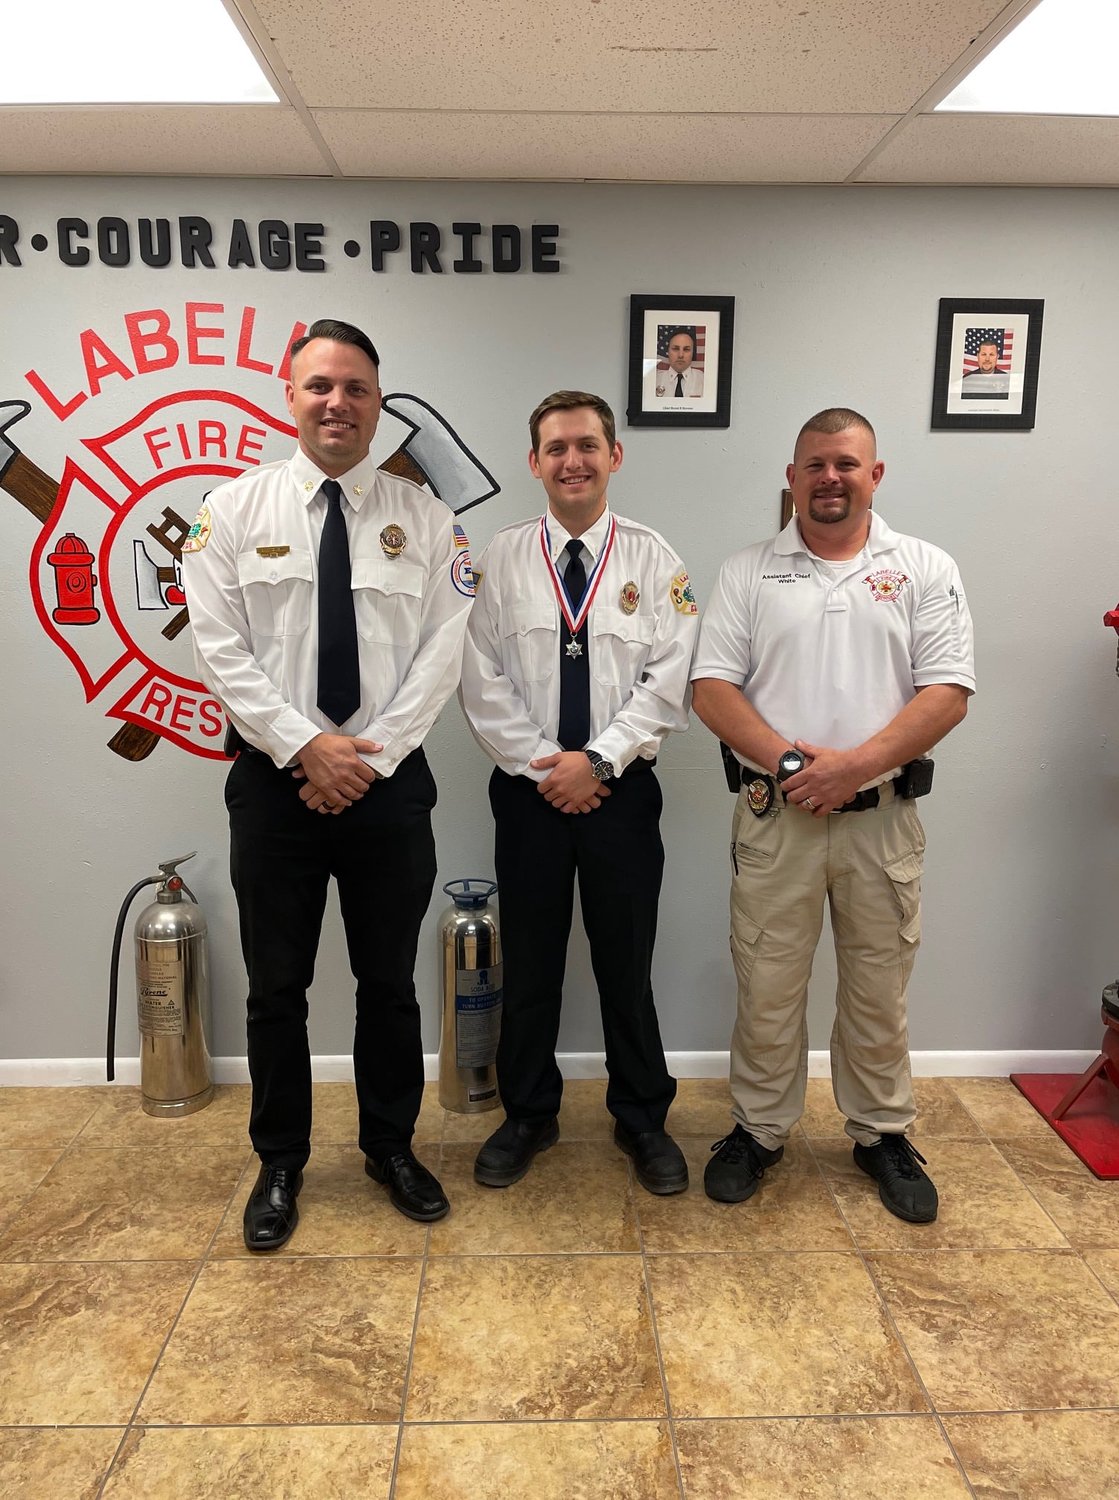 At a ceremony held Monday, November 1, 2021 the LaBelle Fire Department's own Lt. Quinton Willis was presented The Medal of Gallantry for bravery in the line of duty by Chief Brent Stevens, and Assistant Chief David White. Lt. David Hubbard was sworn in as Captain, and Firefighter Judy Morales received Firefighter of the 4th Quarter.